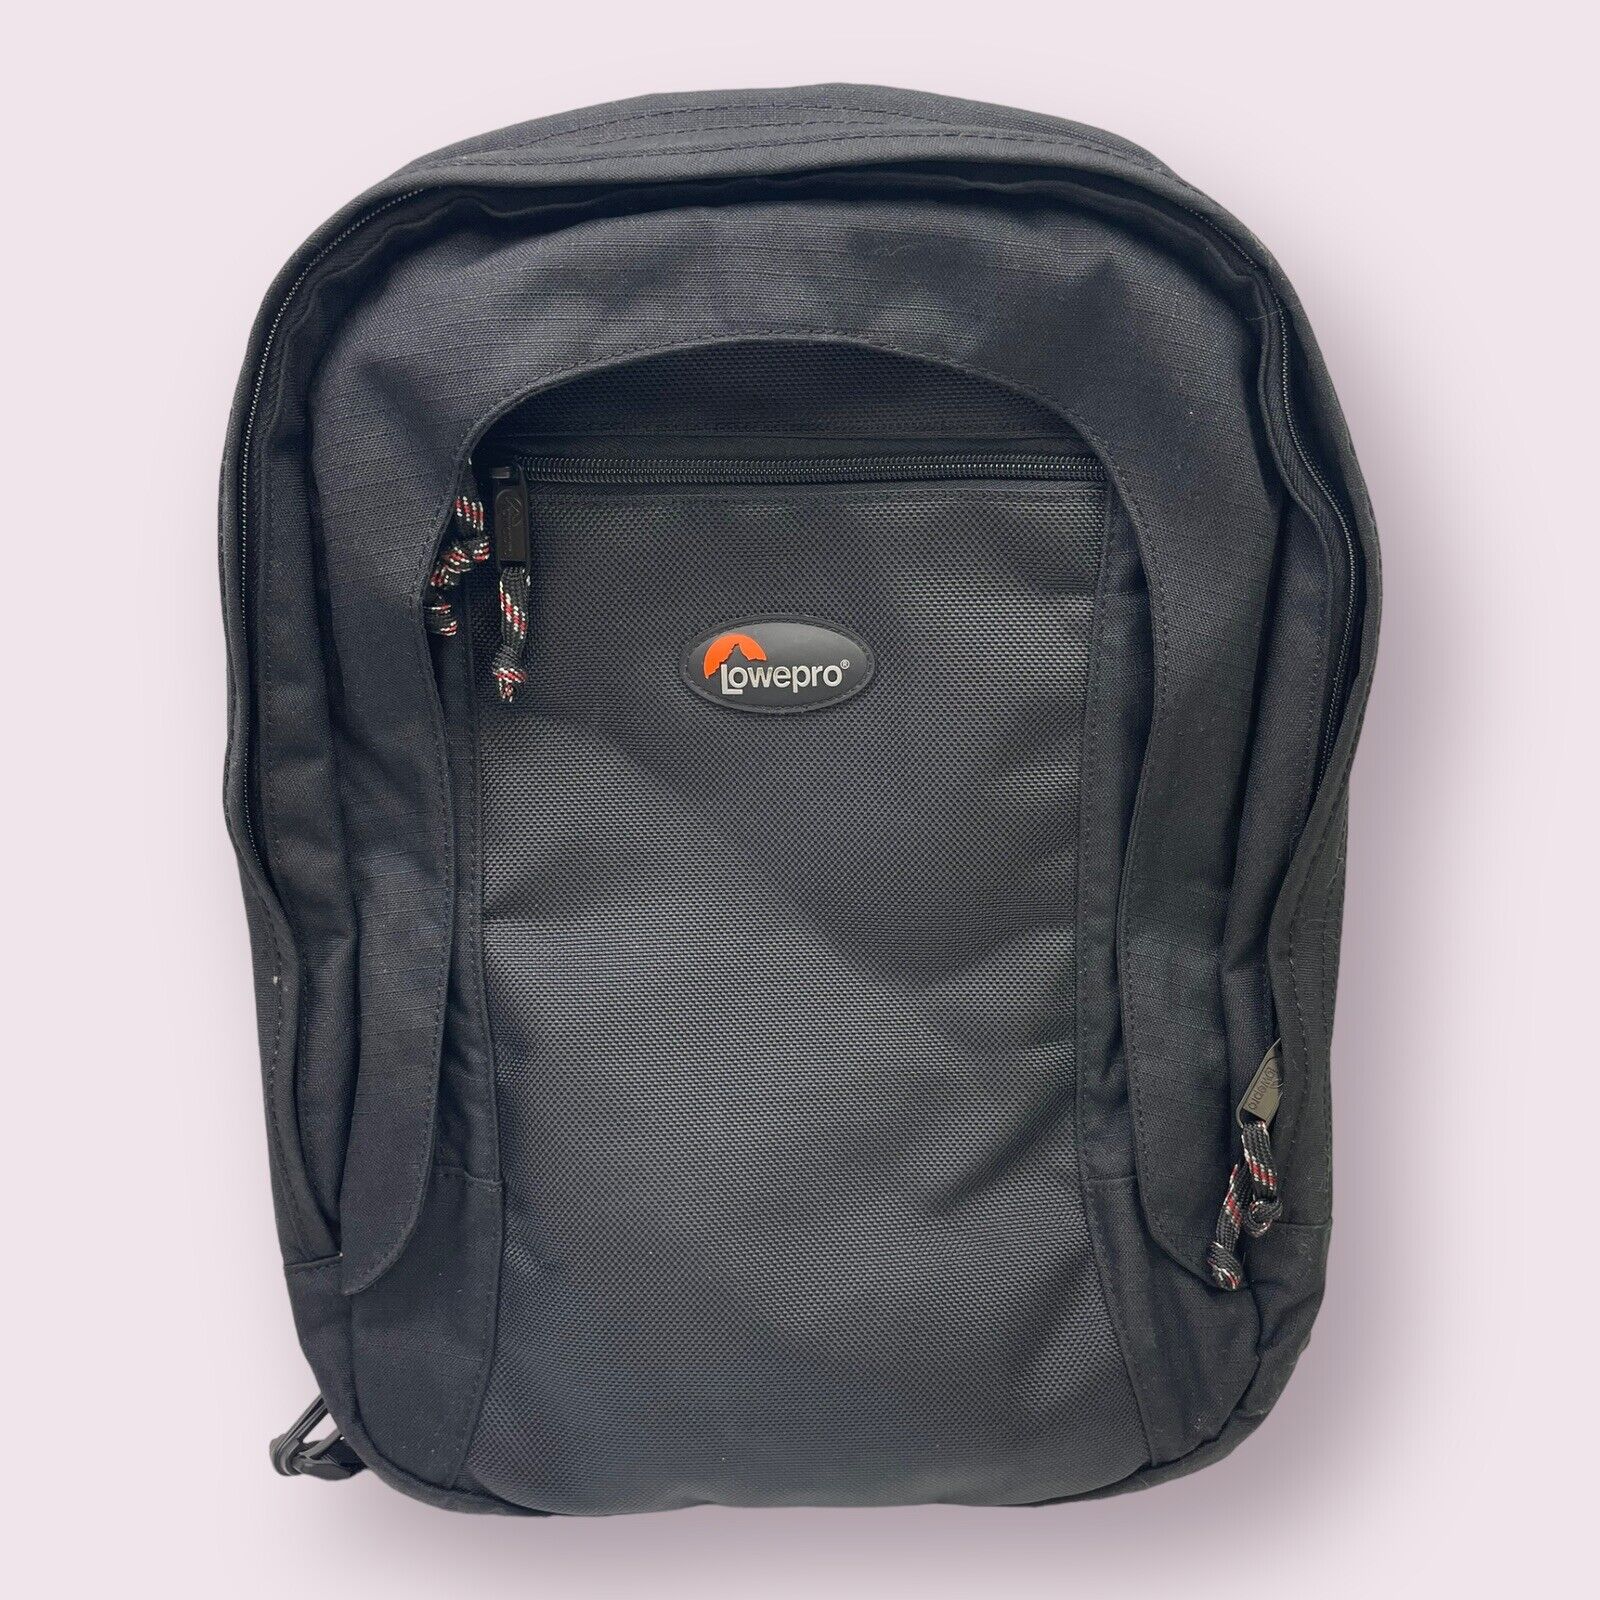 Lowepro Backpack for Tablet or Laptop Lightweight Breathable Tech Bag